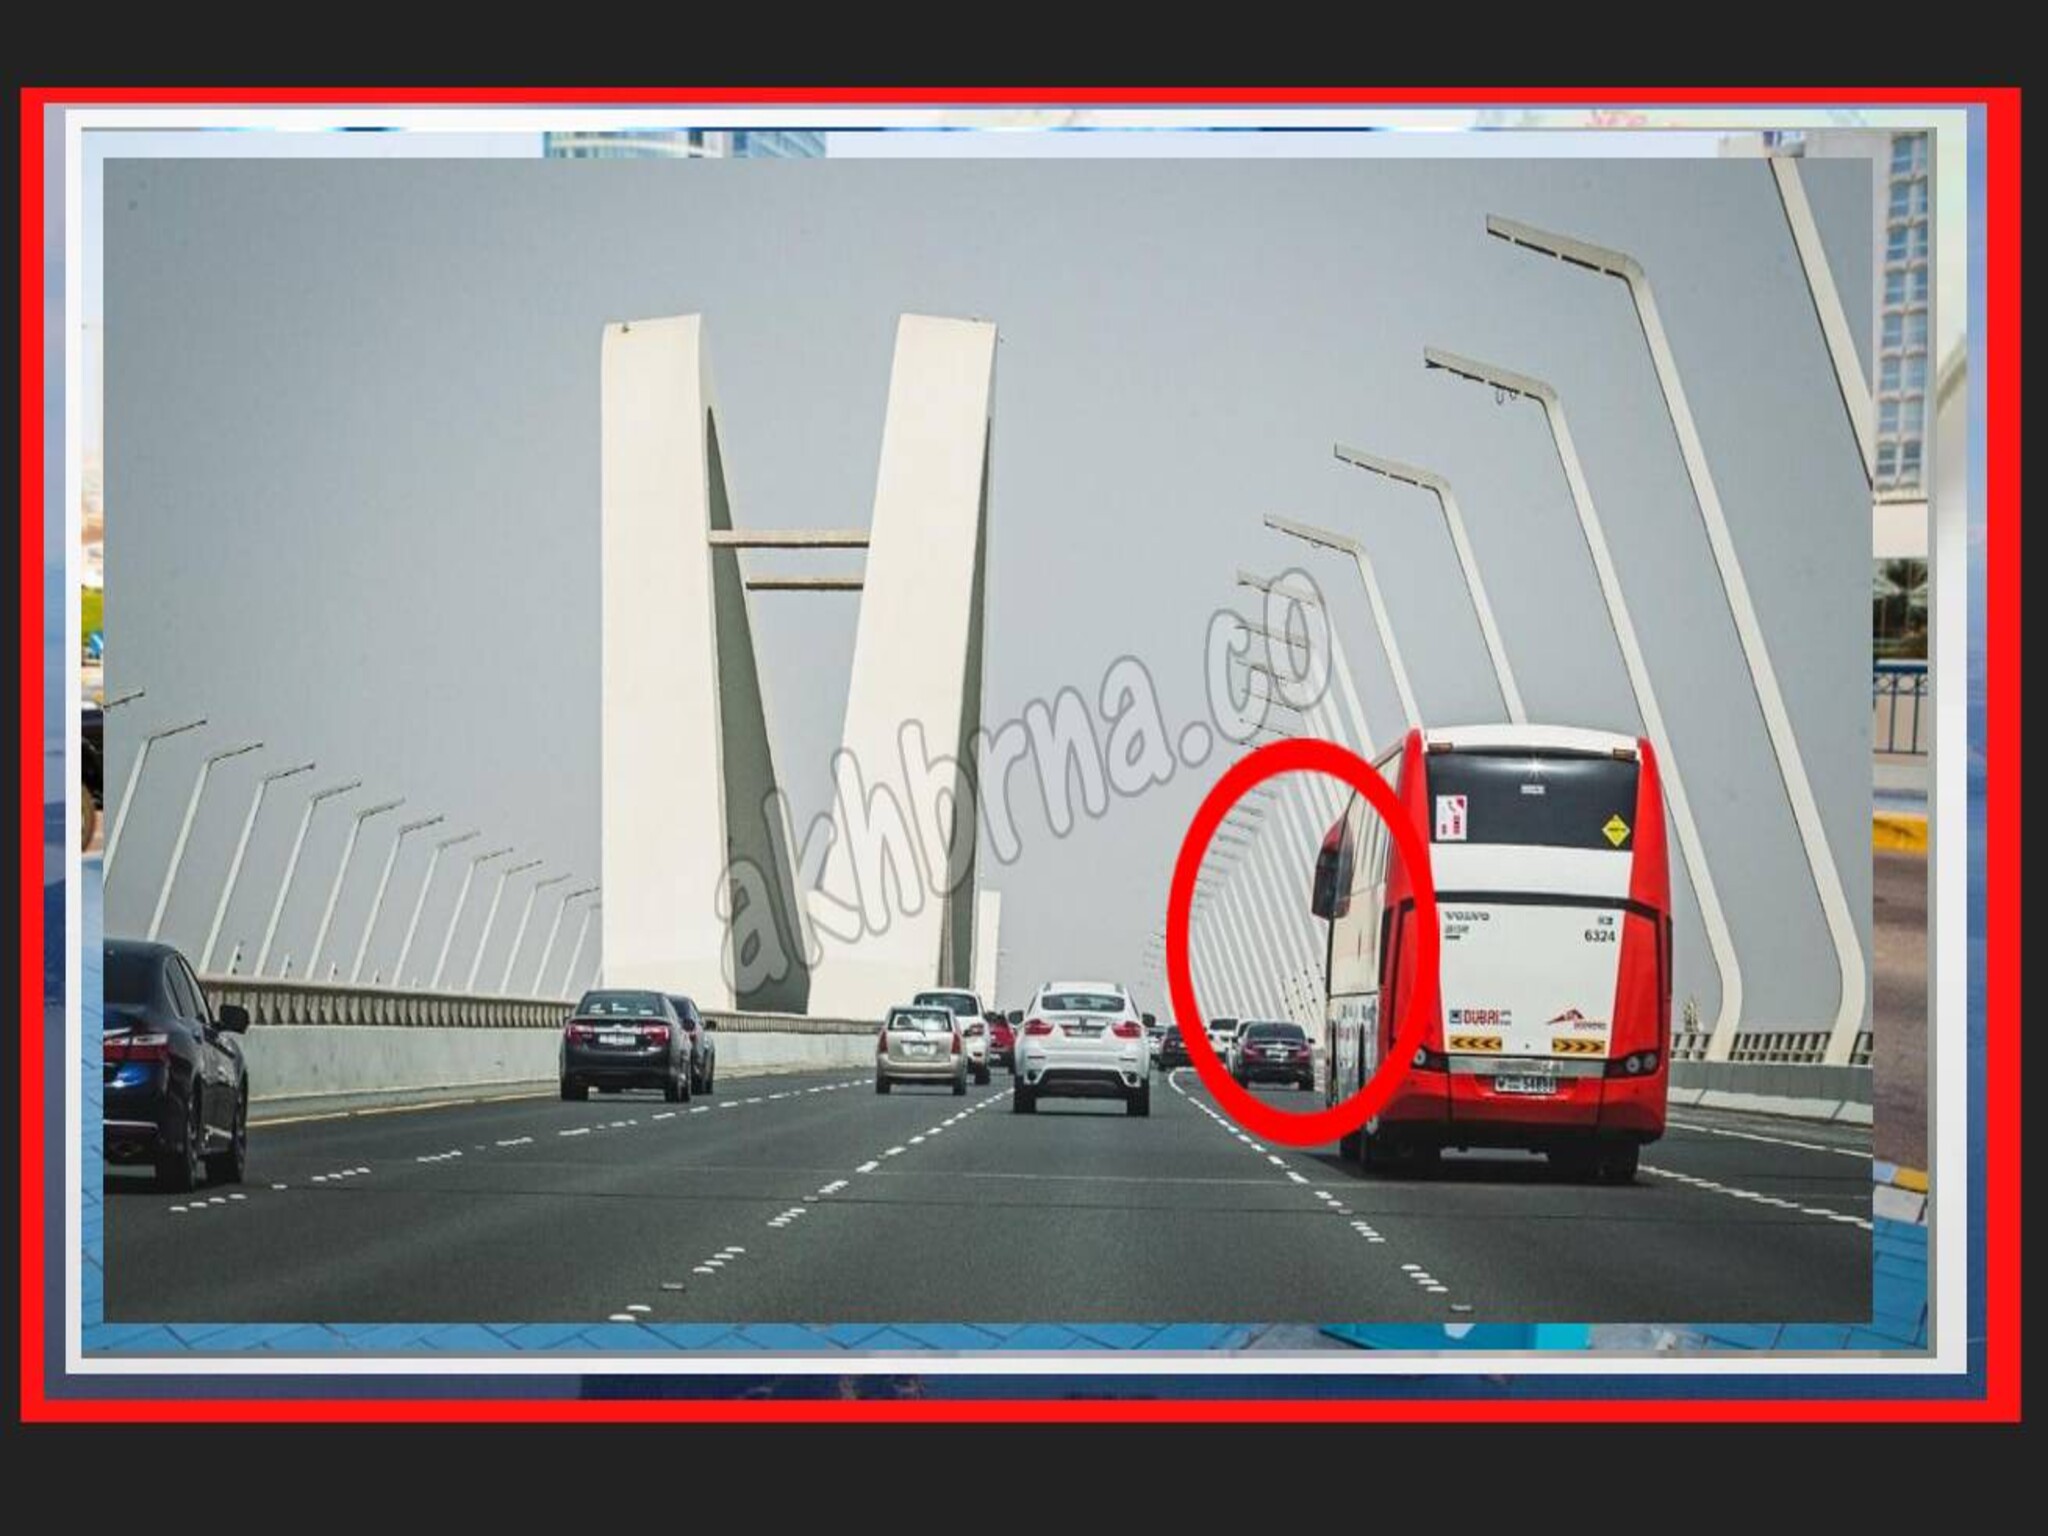 UAE issues an important traffic alert and bans driving on main roads... Details